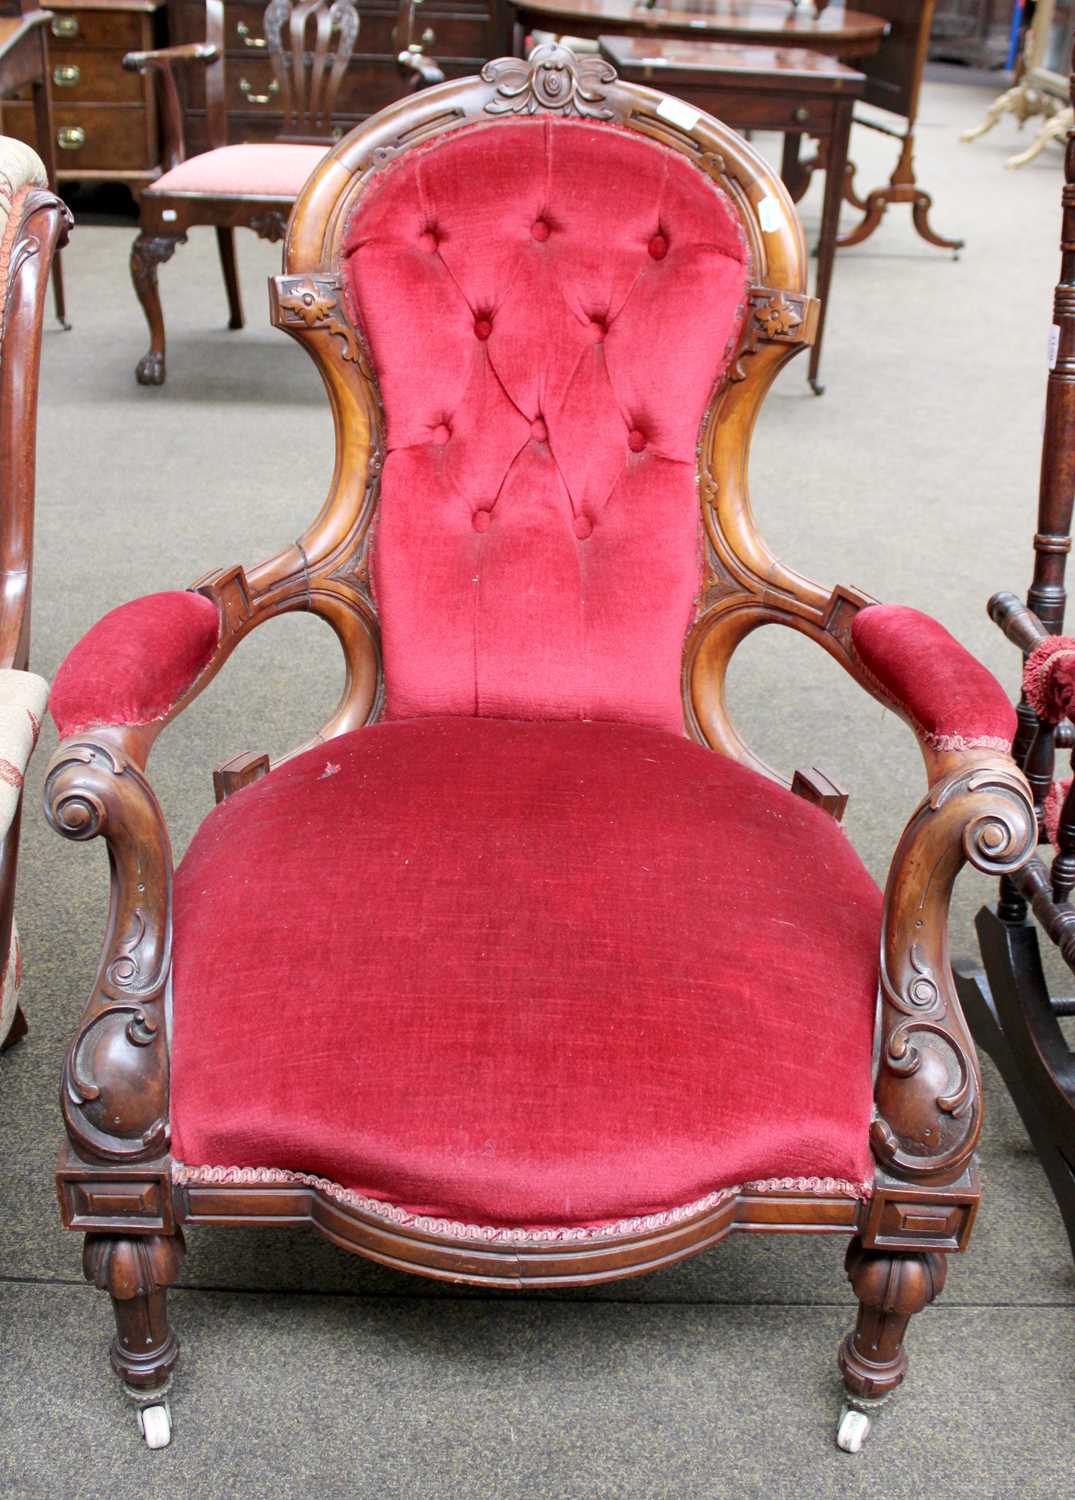 A Victorian Carved Walnut Spoon Back Nursing Chair, with buttoned upholstery and on pot castors